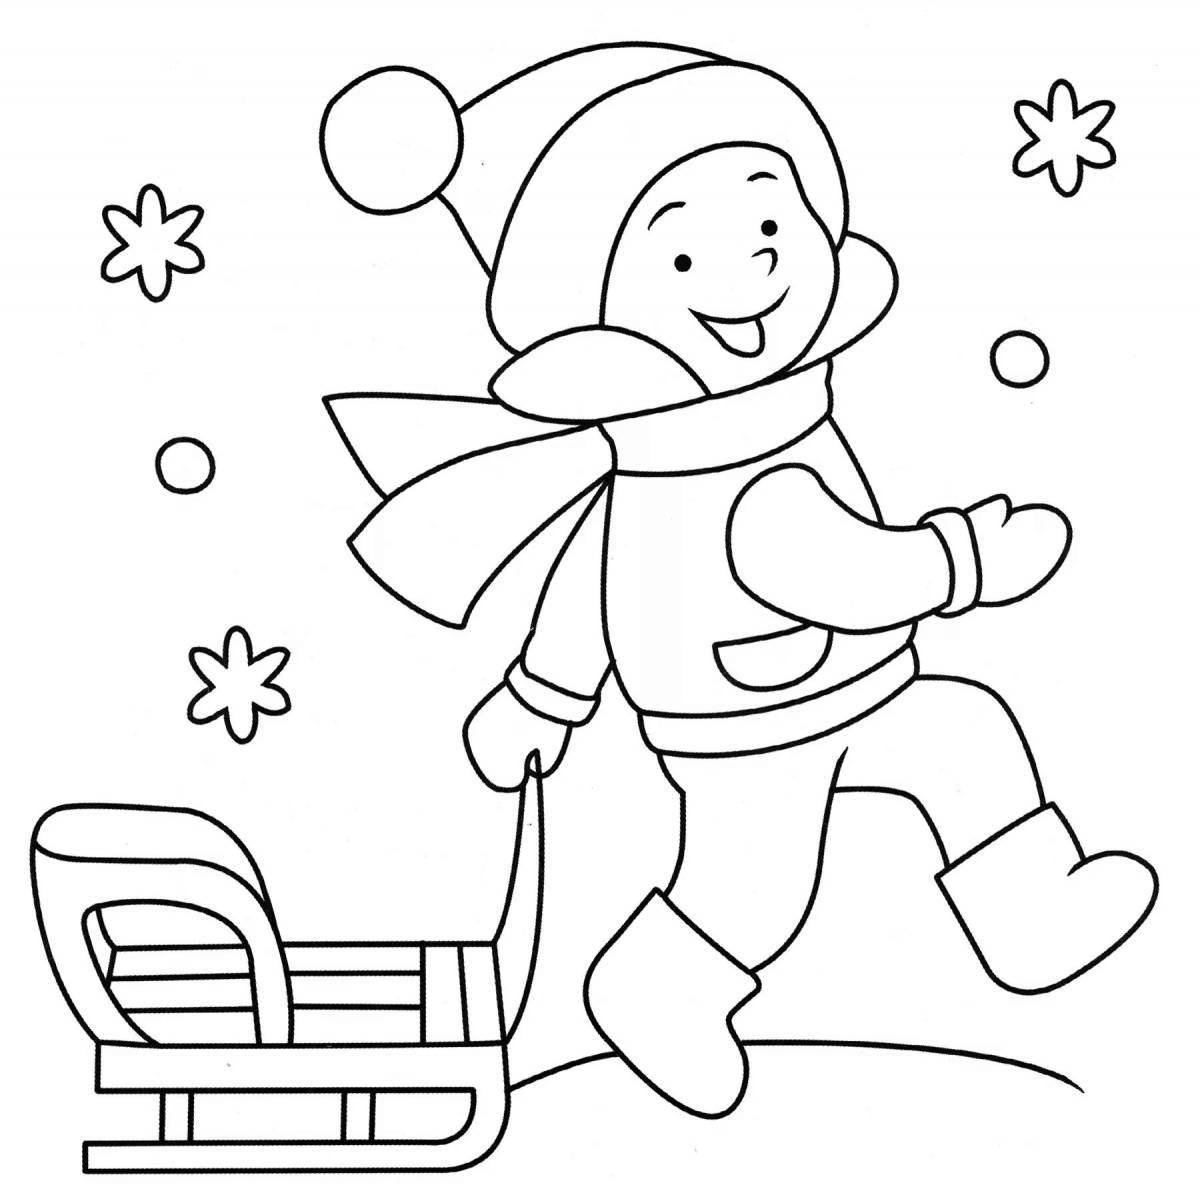 1st class sky winter coloring book